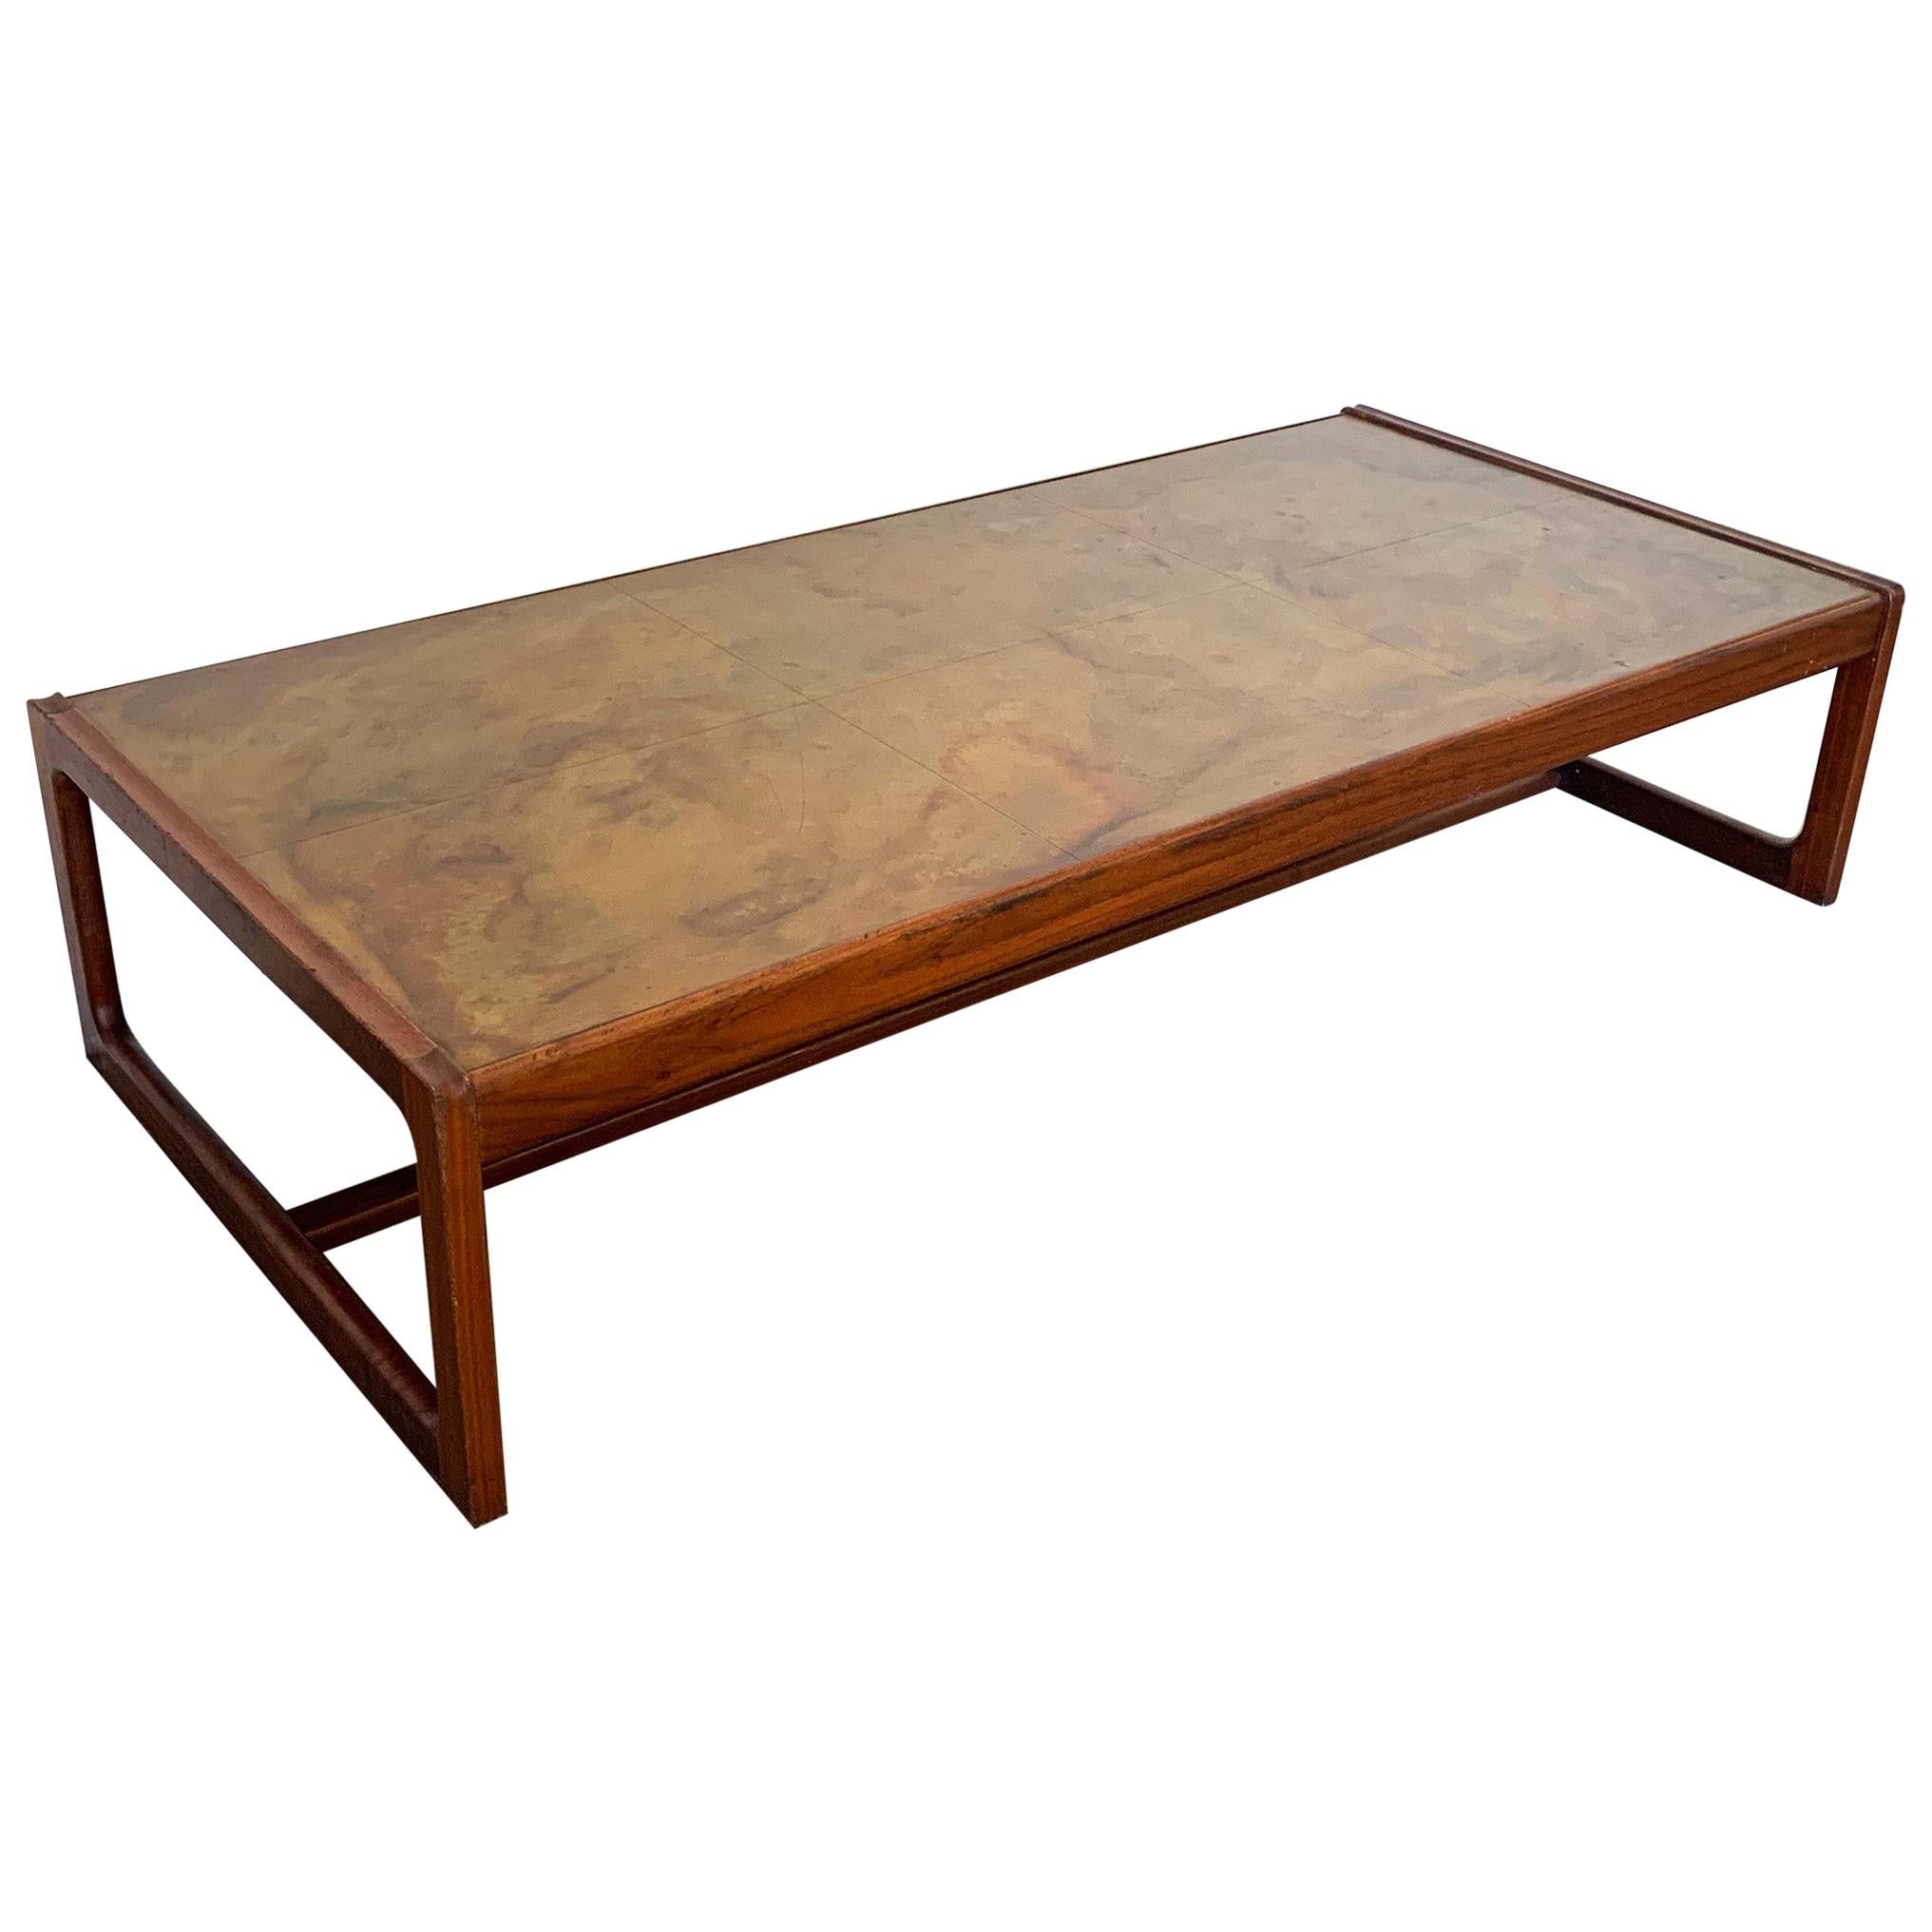 Harry Lunstead Acid Etched Copper and Walnut Coffee Table